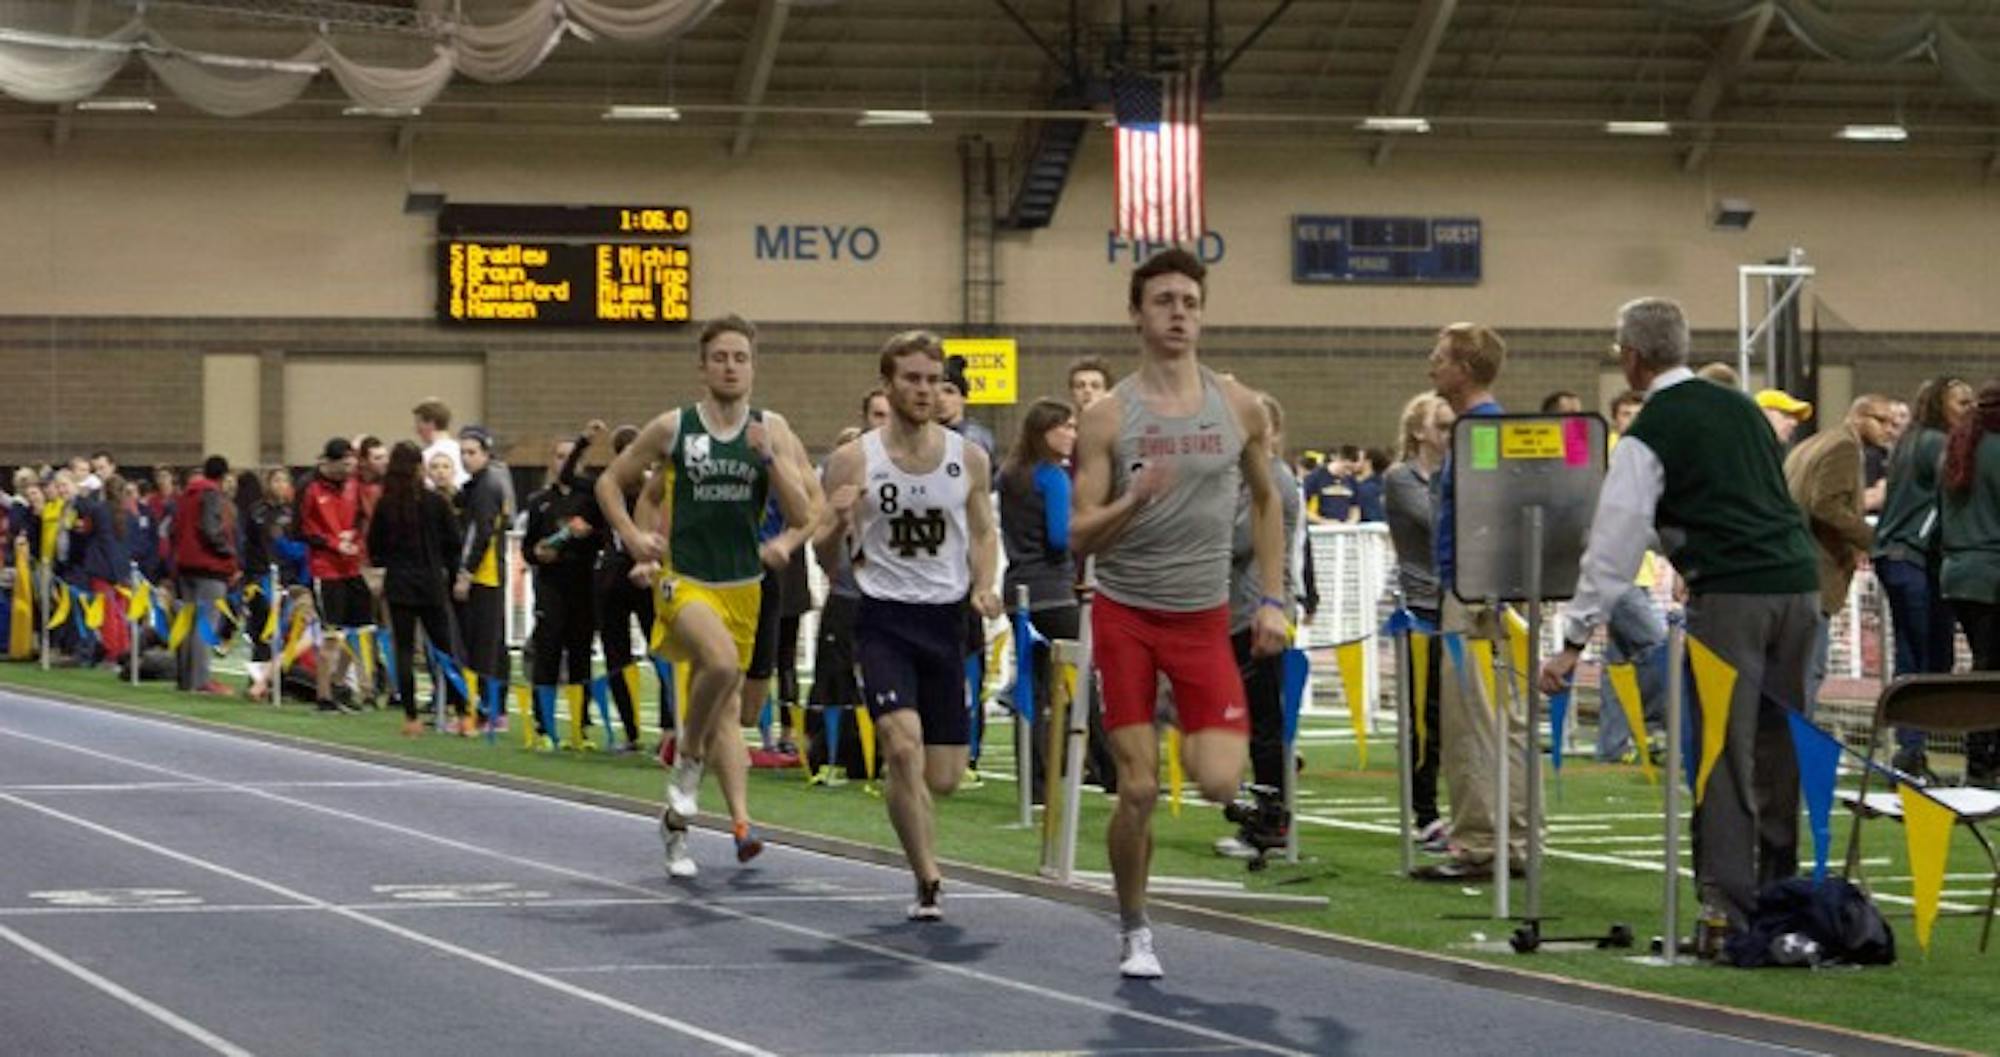 Irish sophomore Kirk Hansen sets his sights on the runner ahead of him during the 800-meter run at the Meyo Invitational on Feb. 6 at Loftus Sports Center. Hansen finished in 17th place in the event.